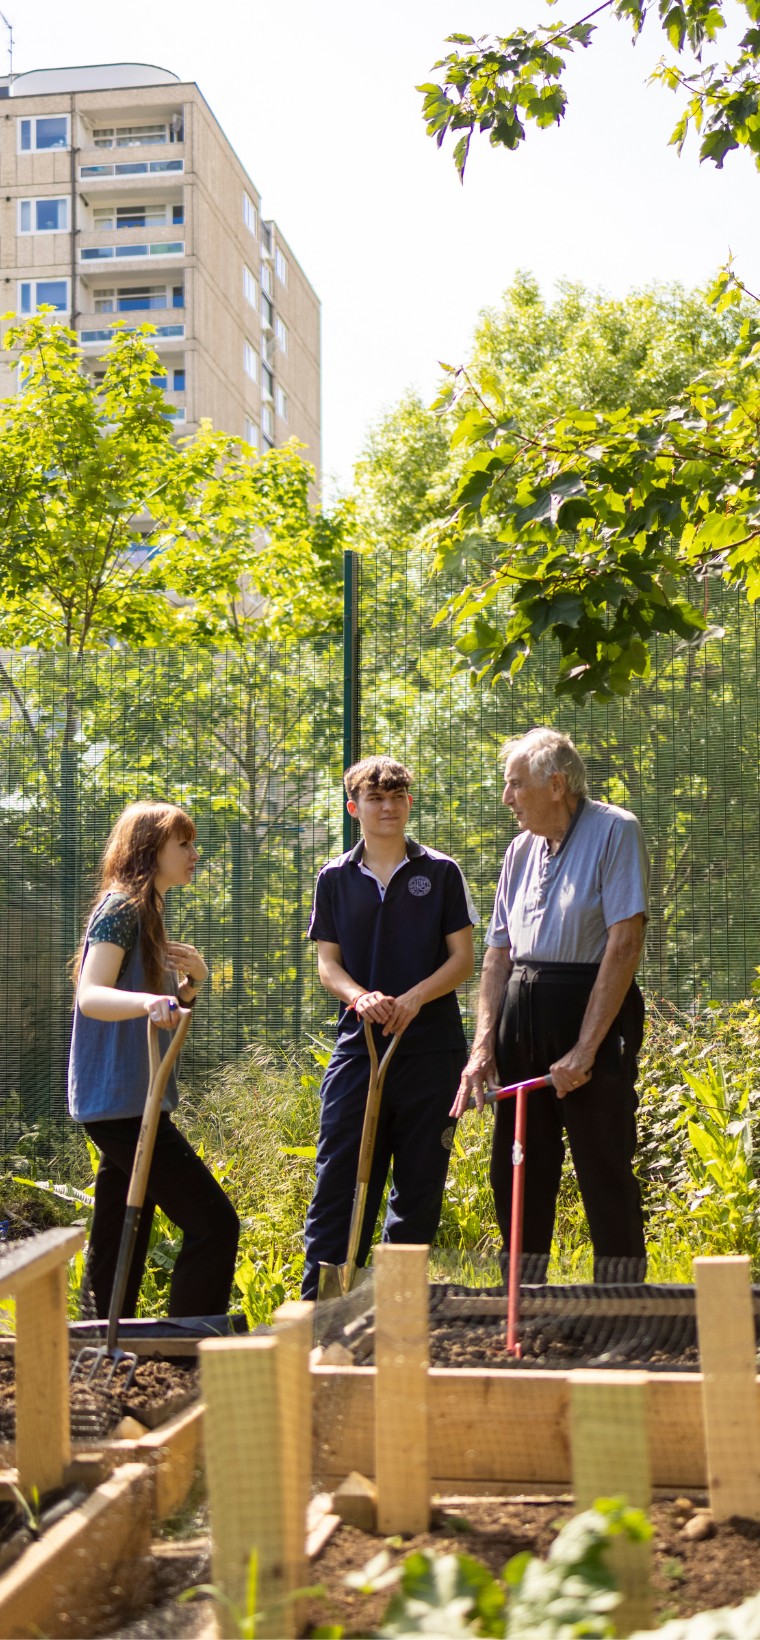 Senior pupils with a teacher in the garden learning about the gardening techniques at Ibtsock Place School